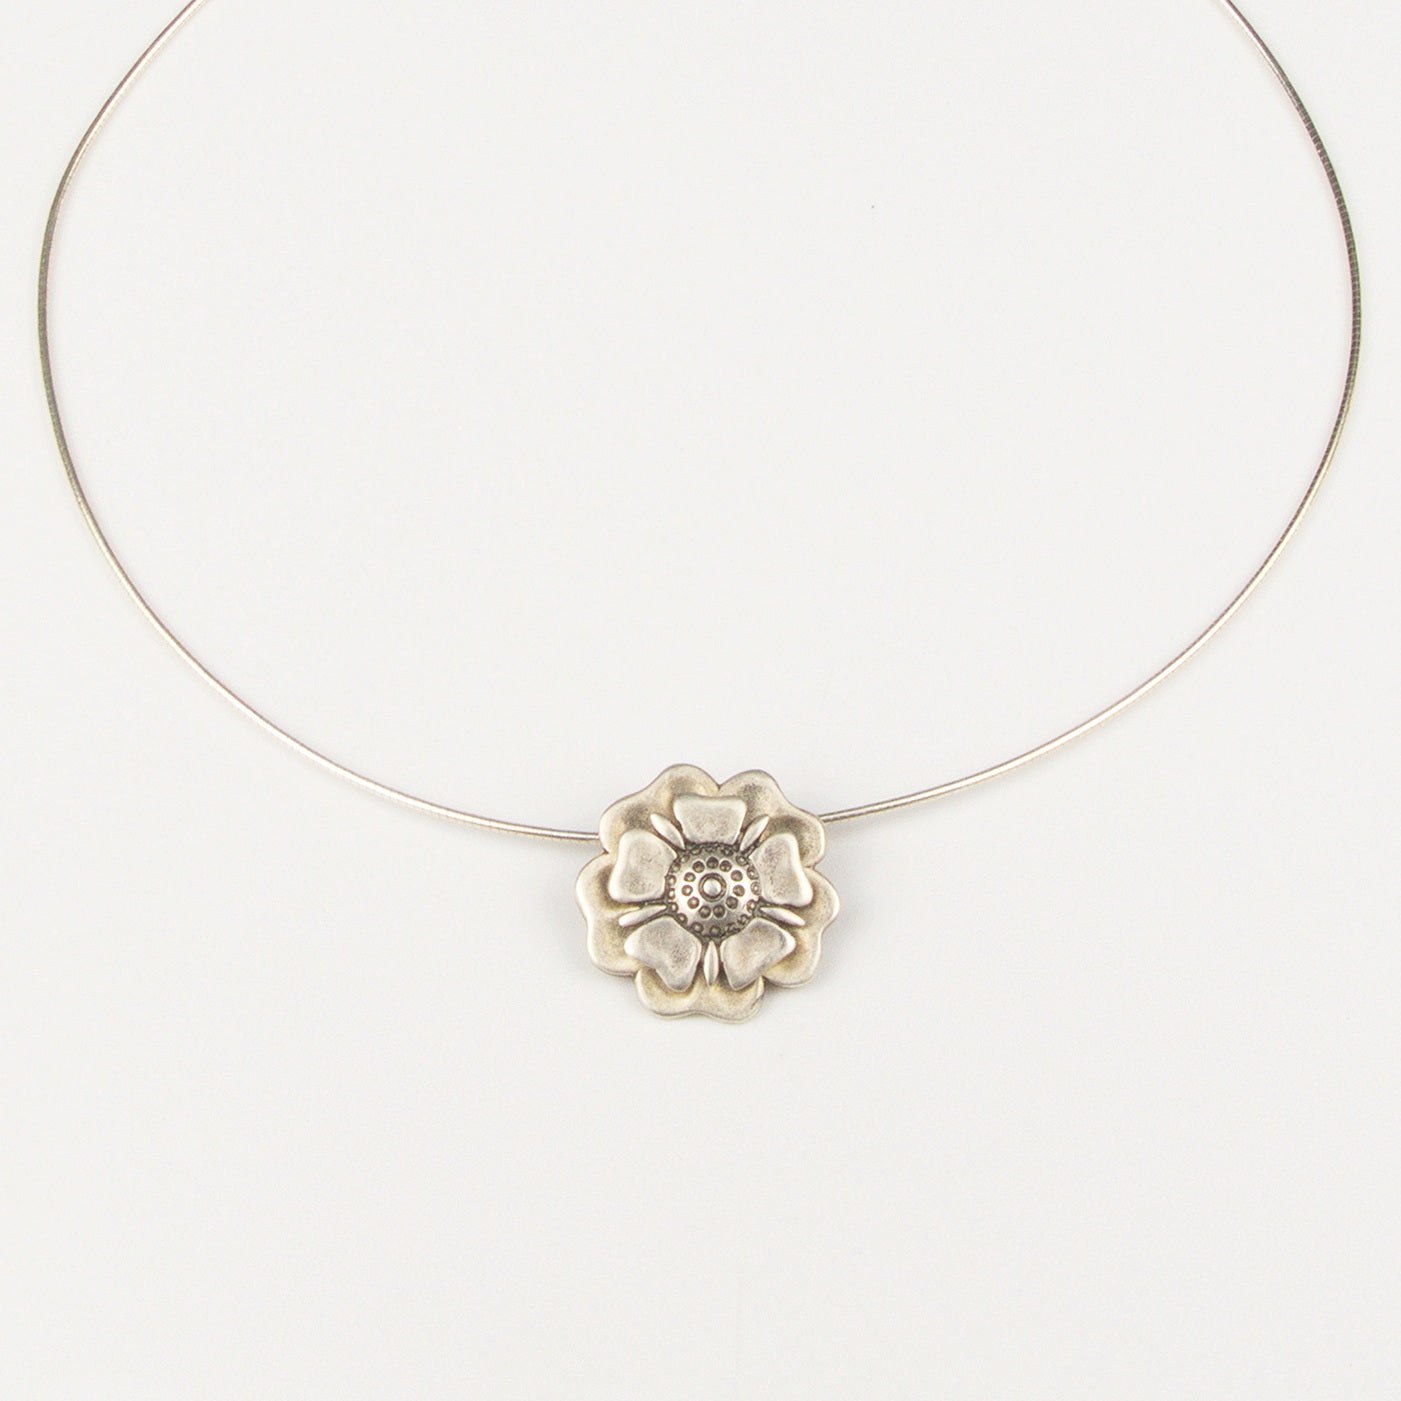 Outlander Jacobite Rose Coin Collection necklace with rose charm on a white background with rose by Aurora Jewellery, Orkney, Scotland